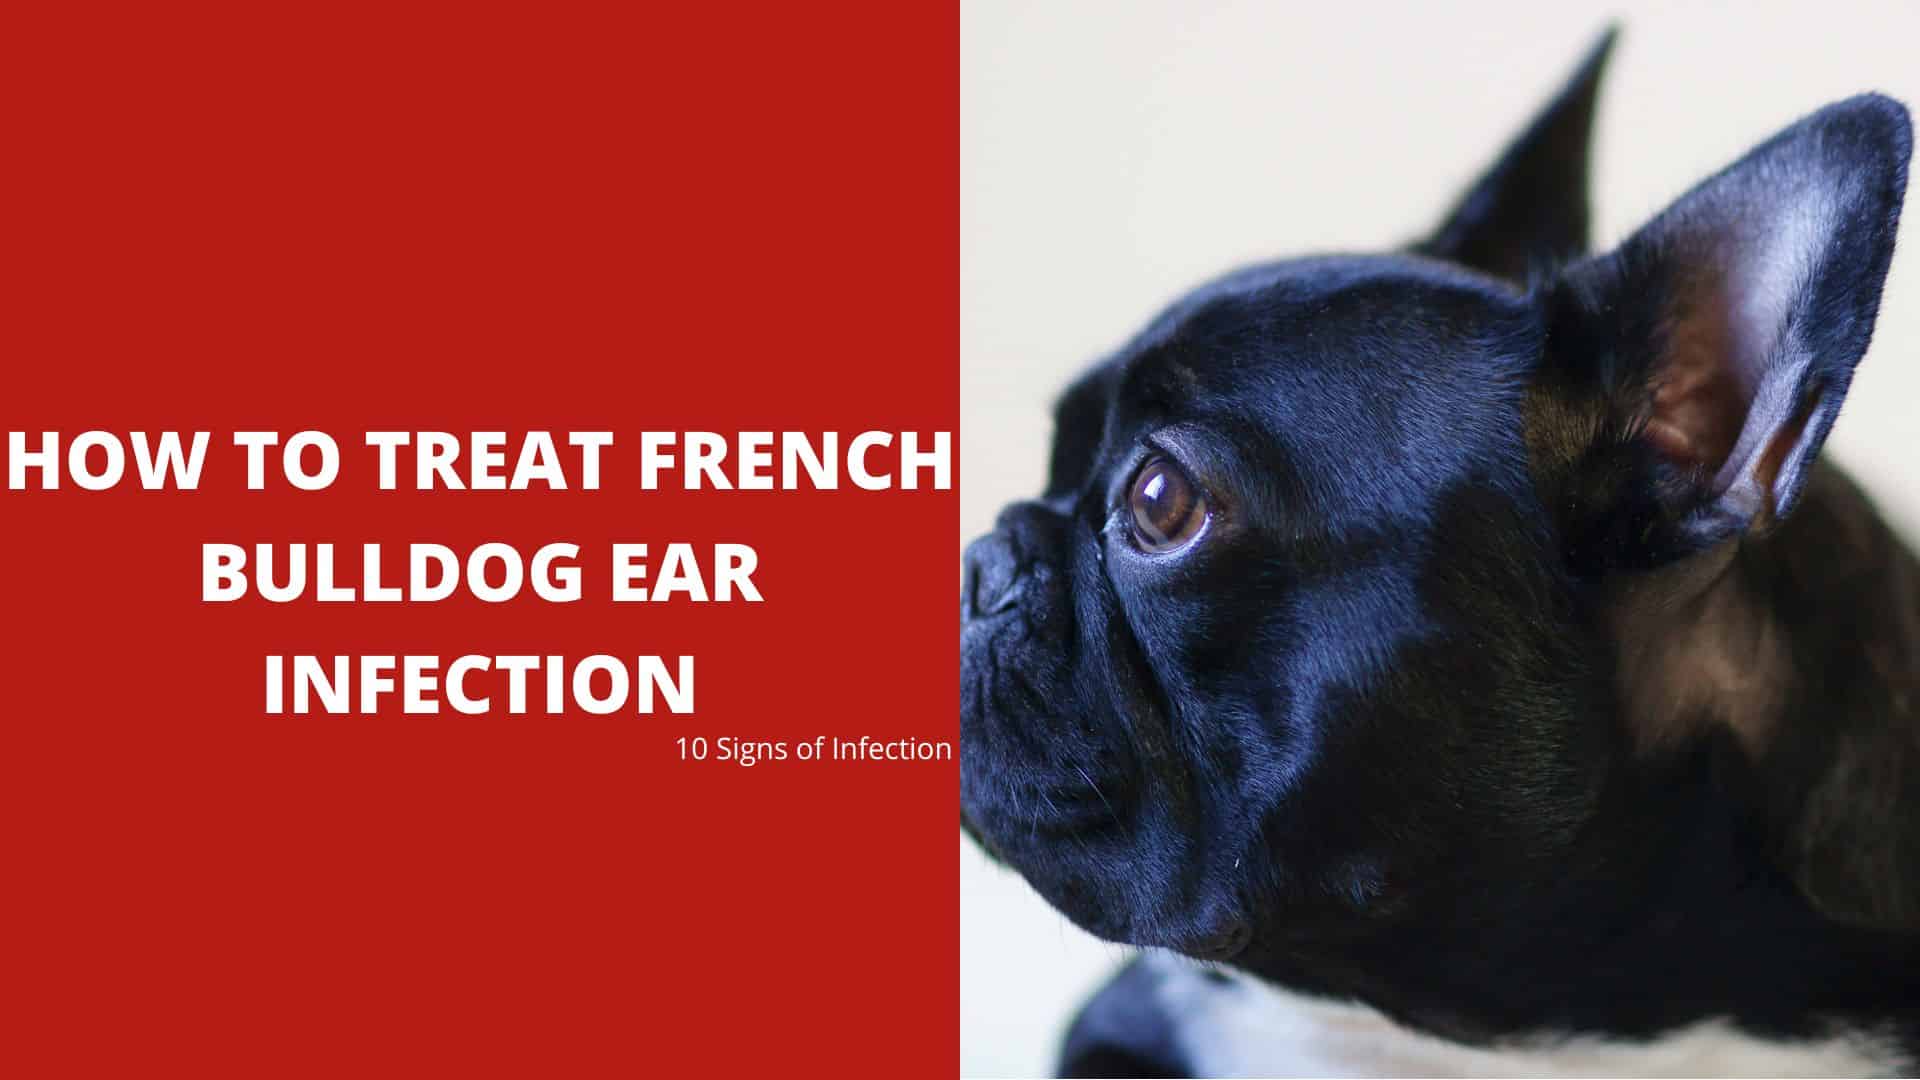 How to Treat French Bulldog Ear Infection – 10 Signs of Infection